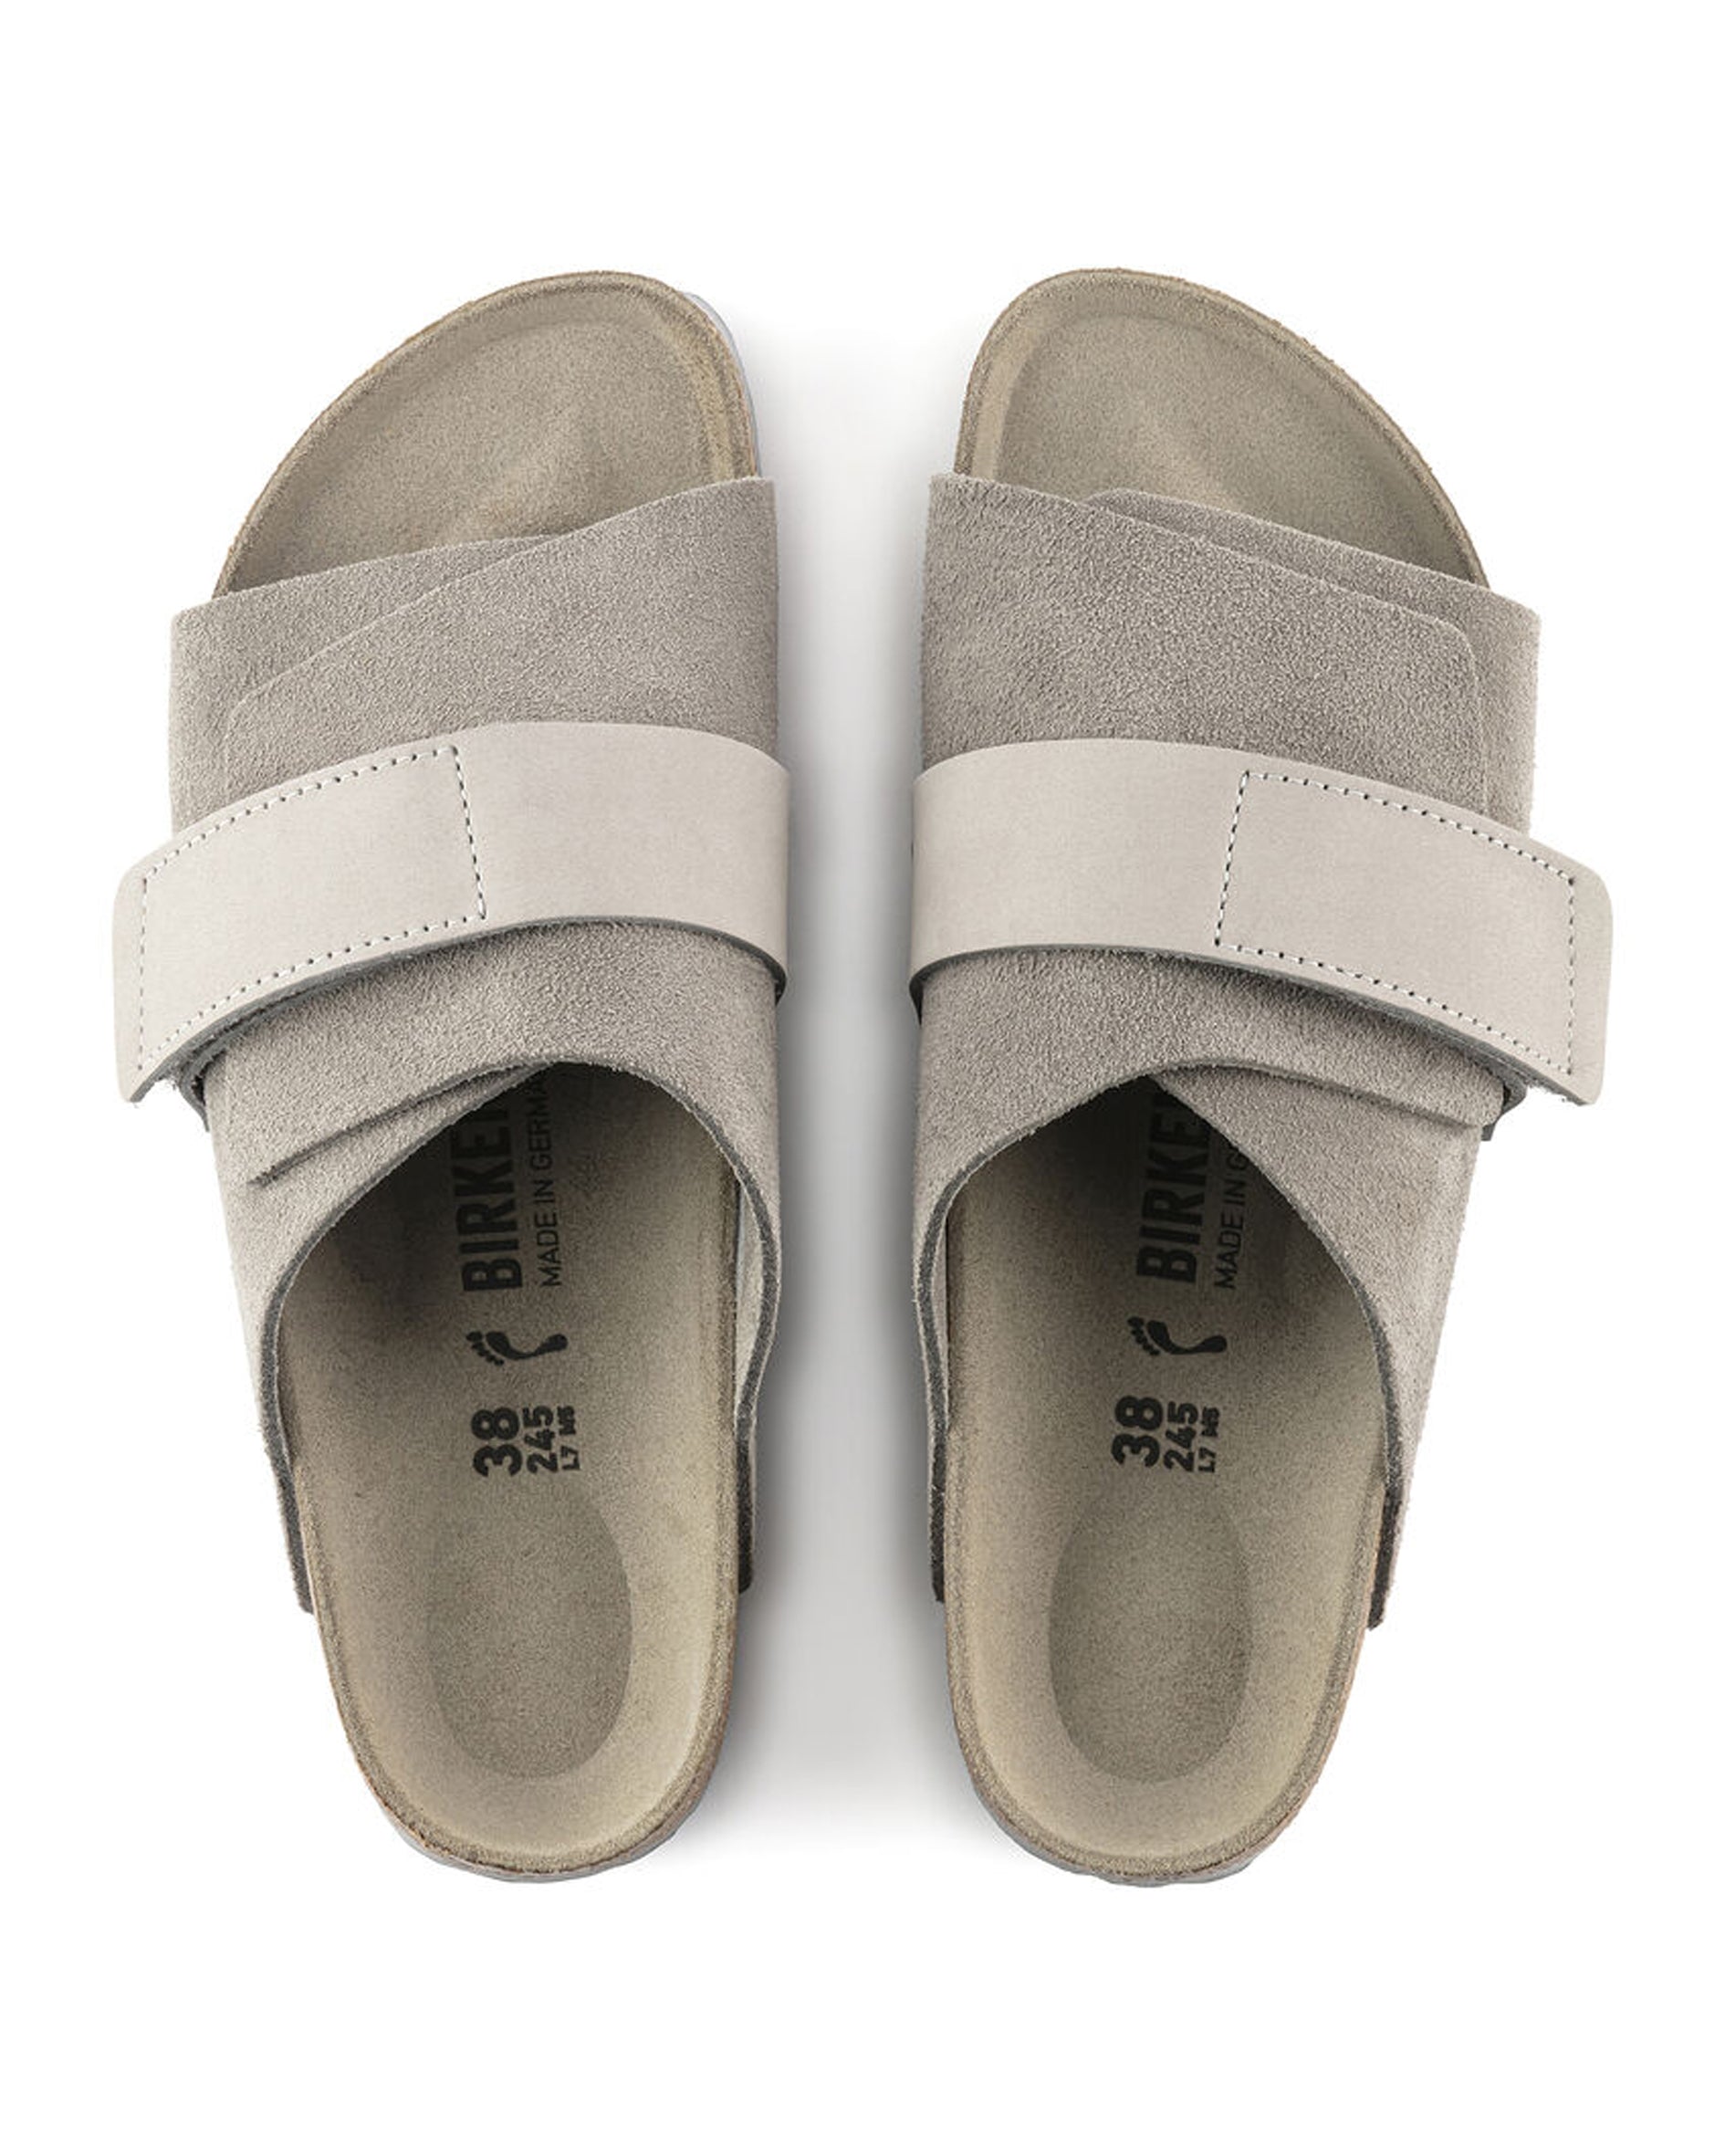 Kyoto Stone Coin Soft Suede & Nubuck Leather Sandals